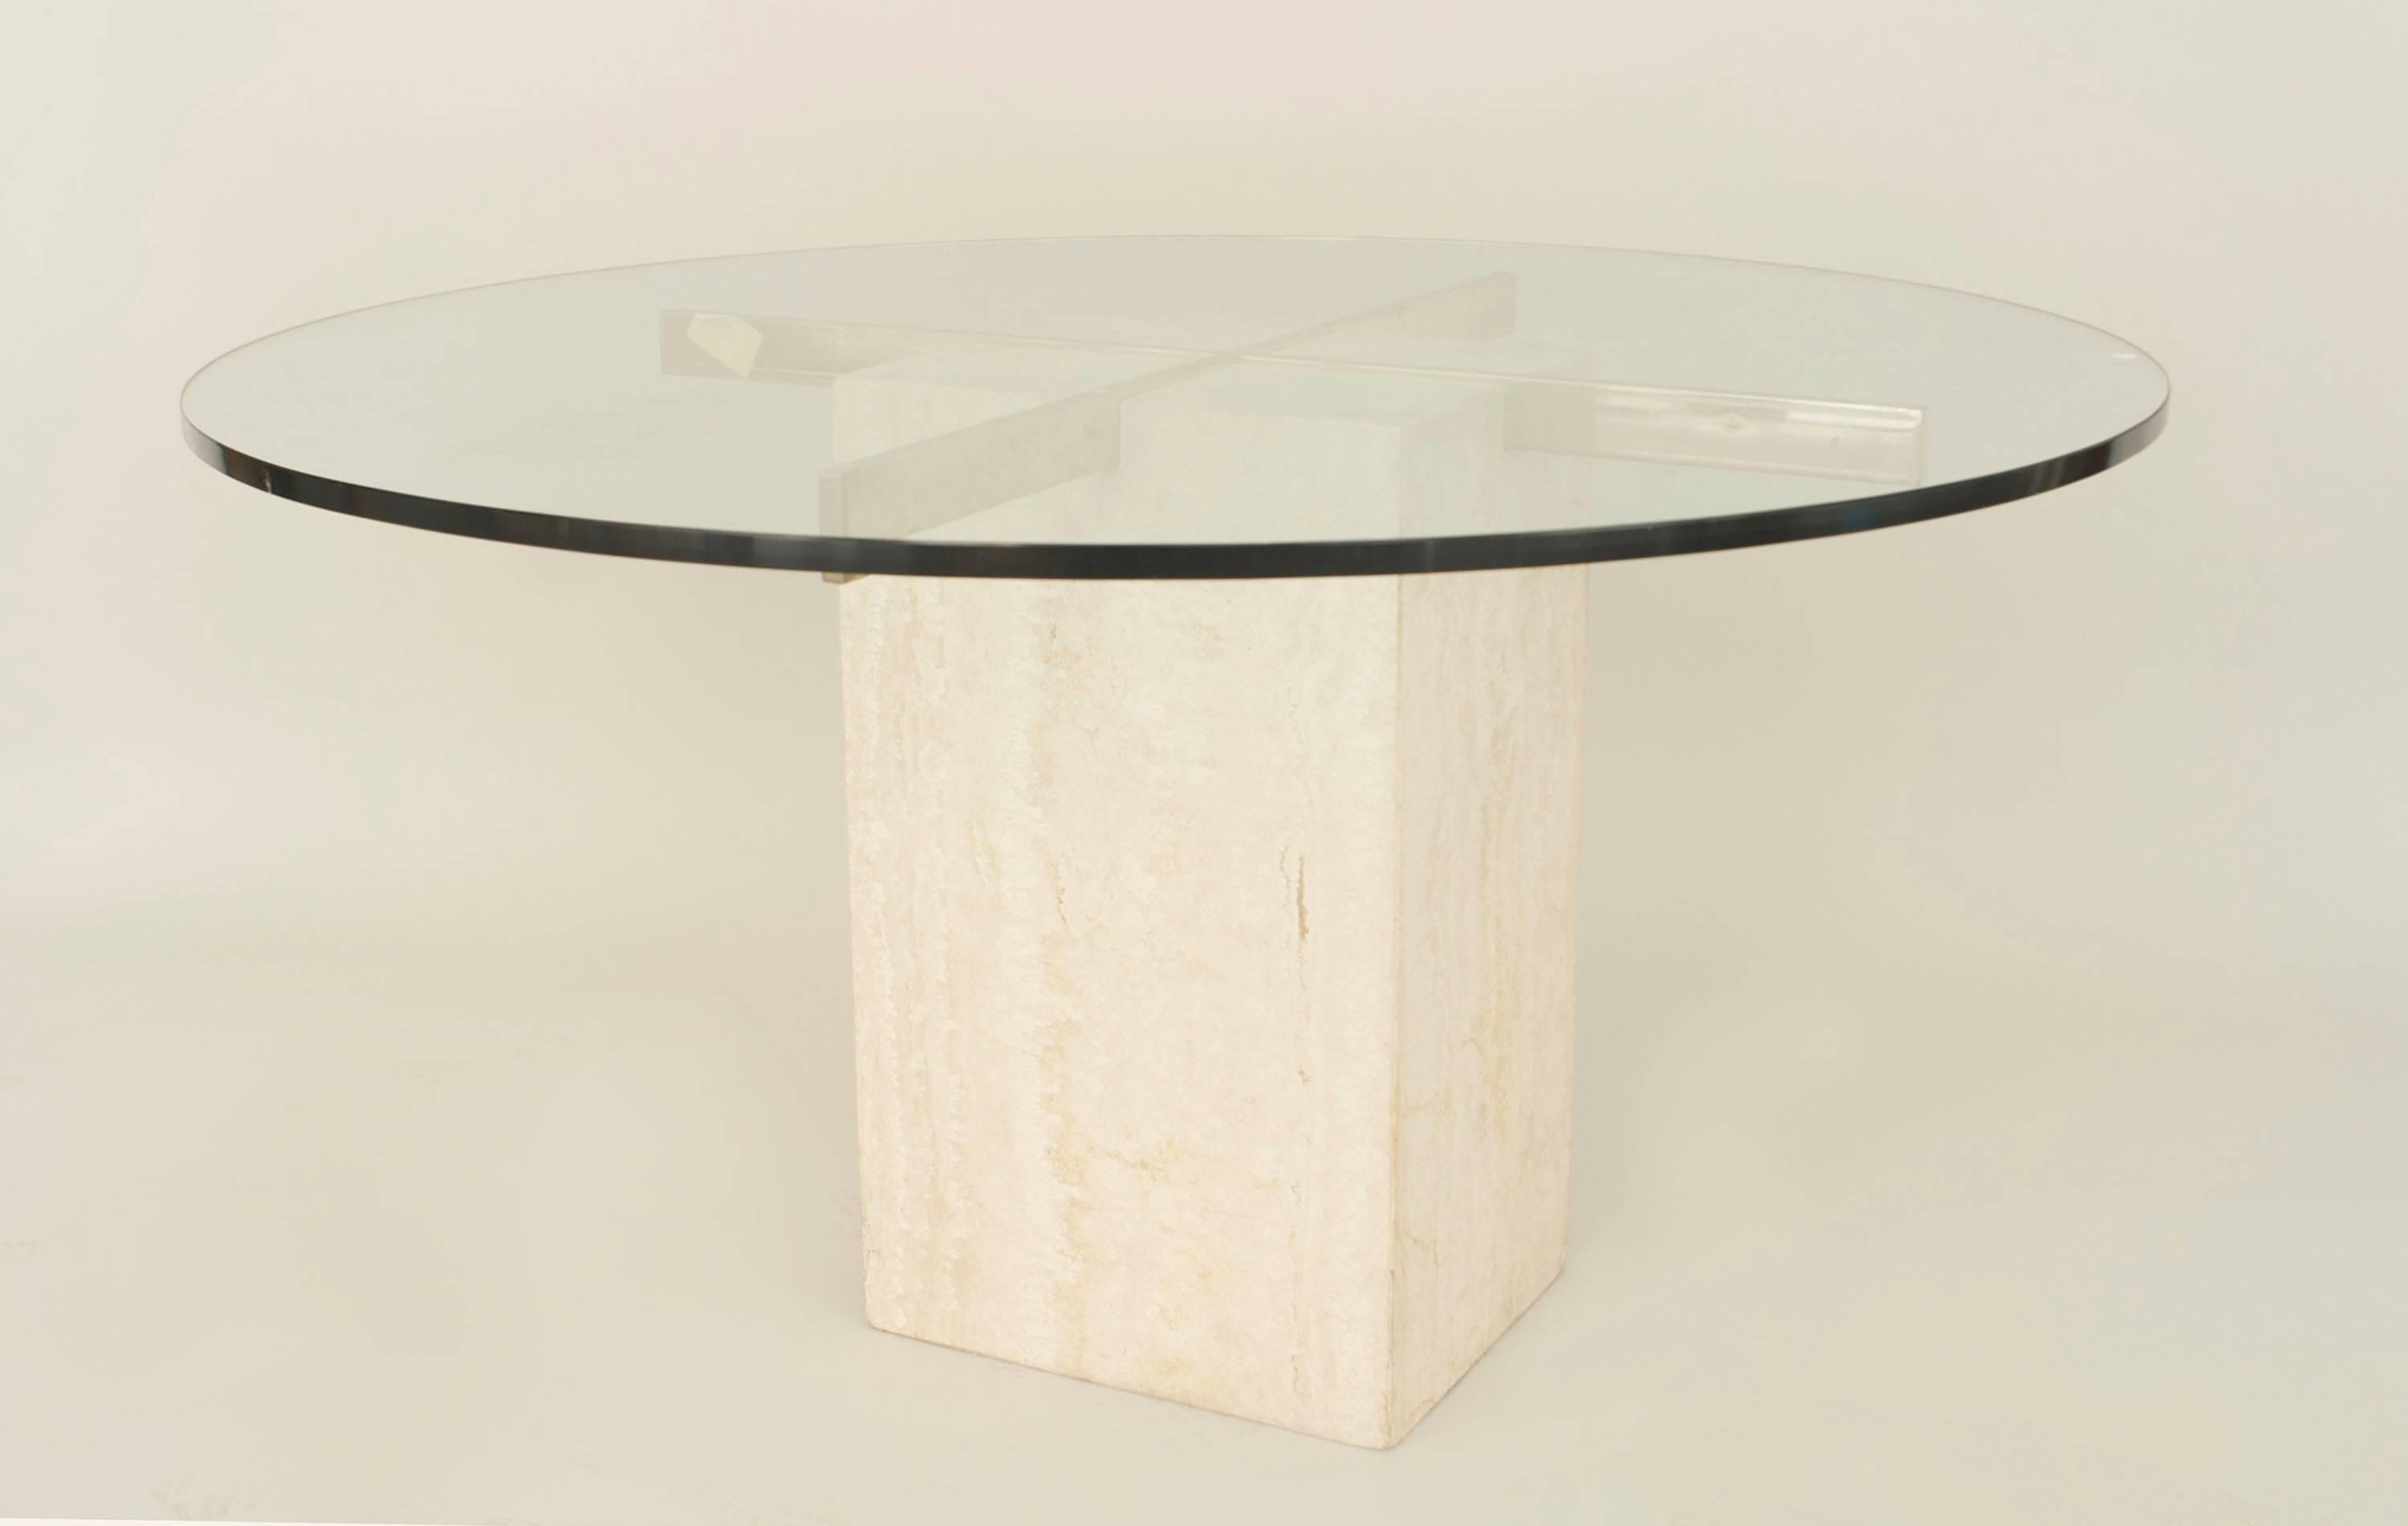 American postwar design dining table with a square travertine base having a brass 